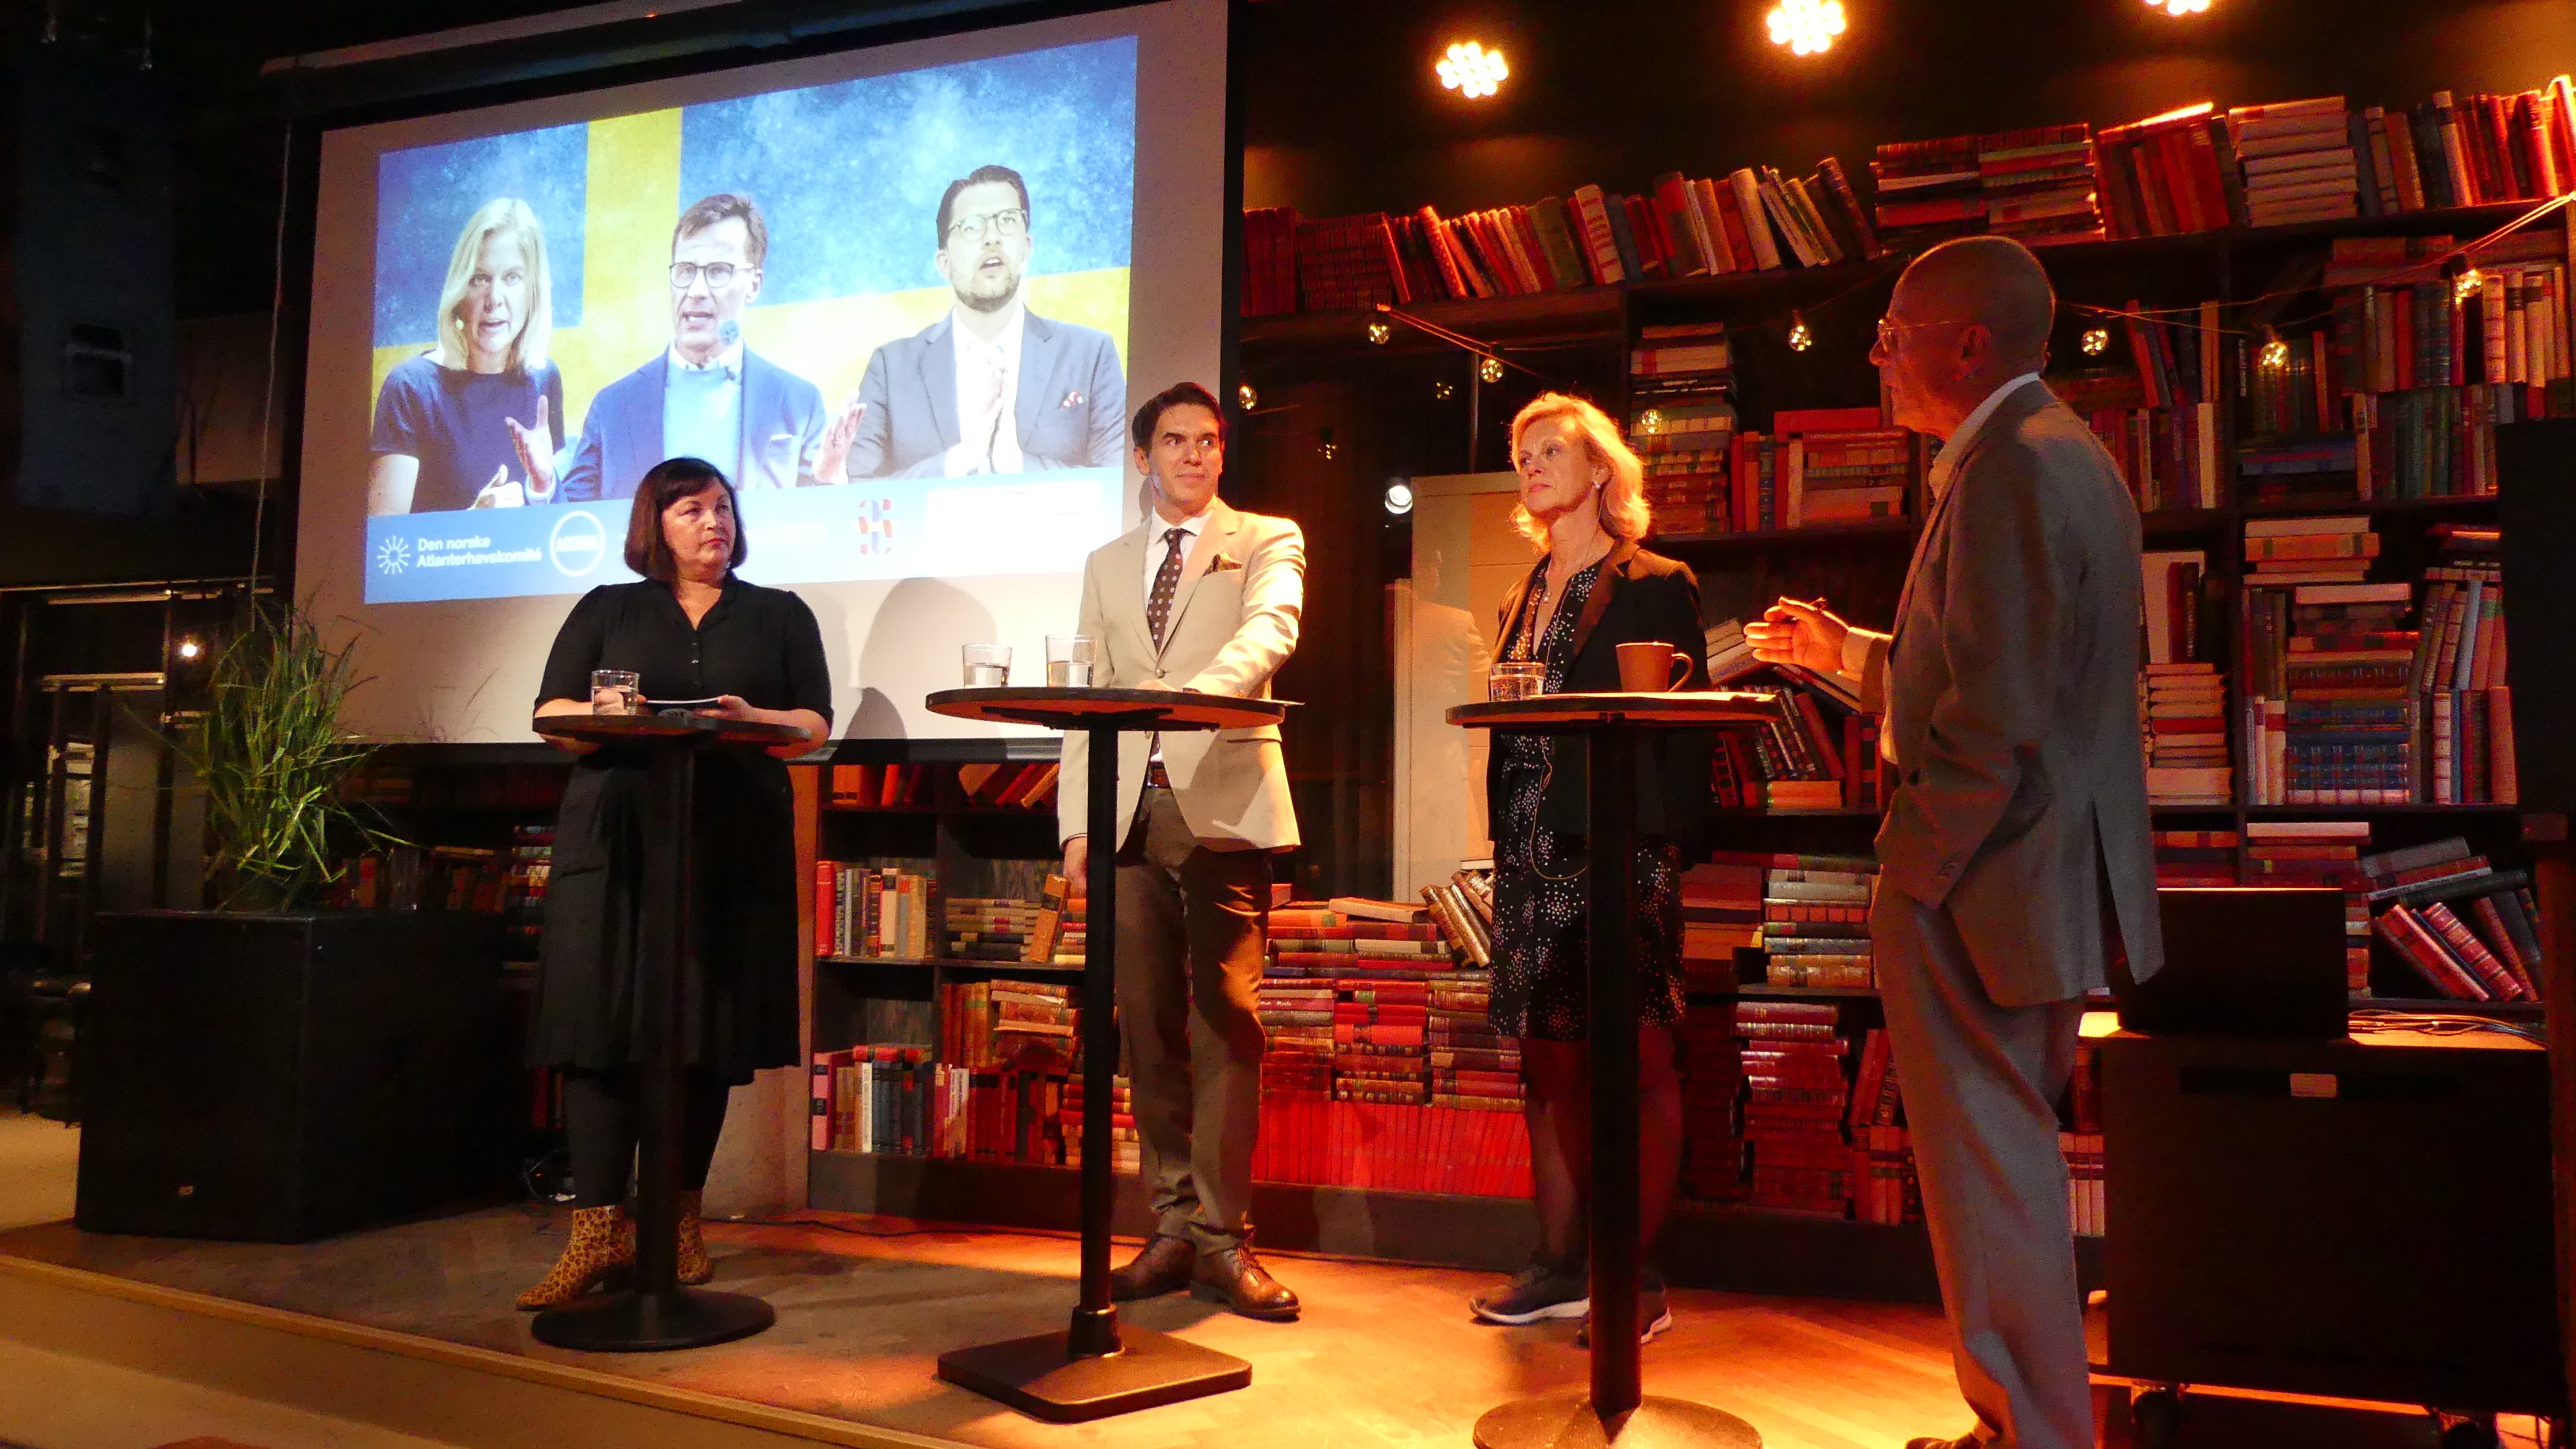 Swedes abroad: Can they really sway an election?